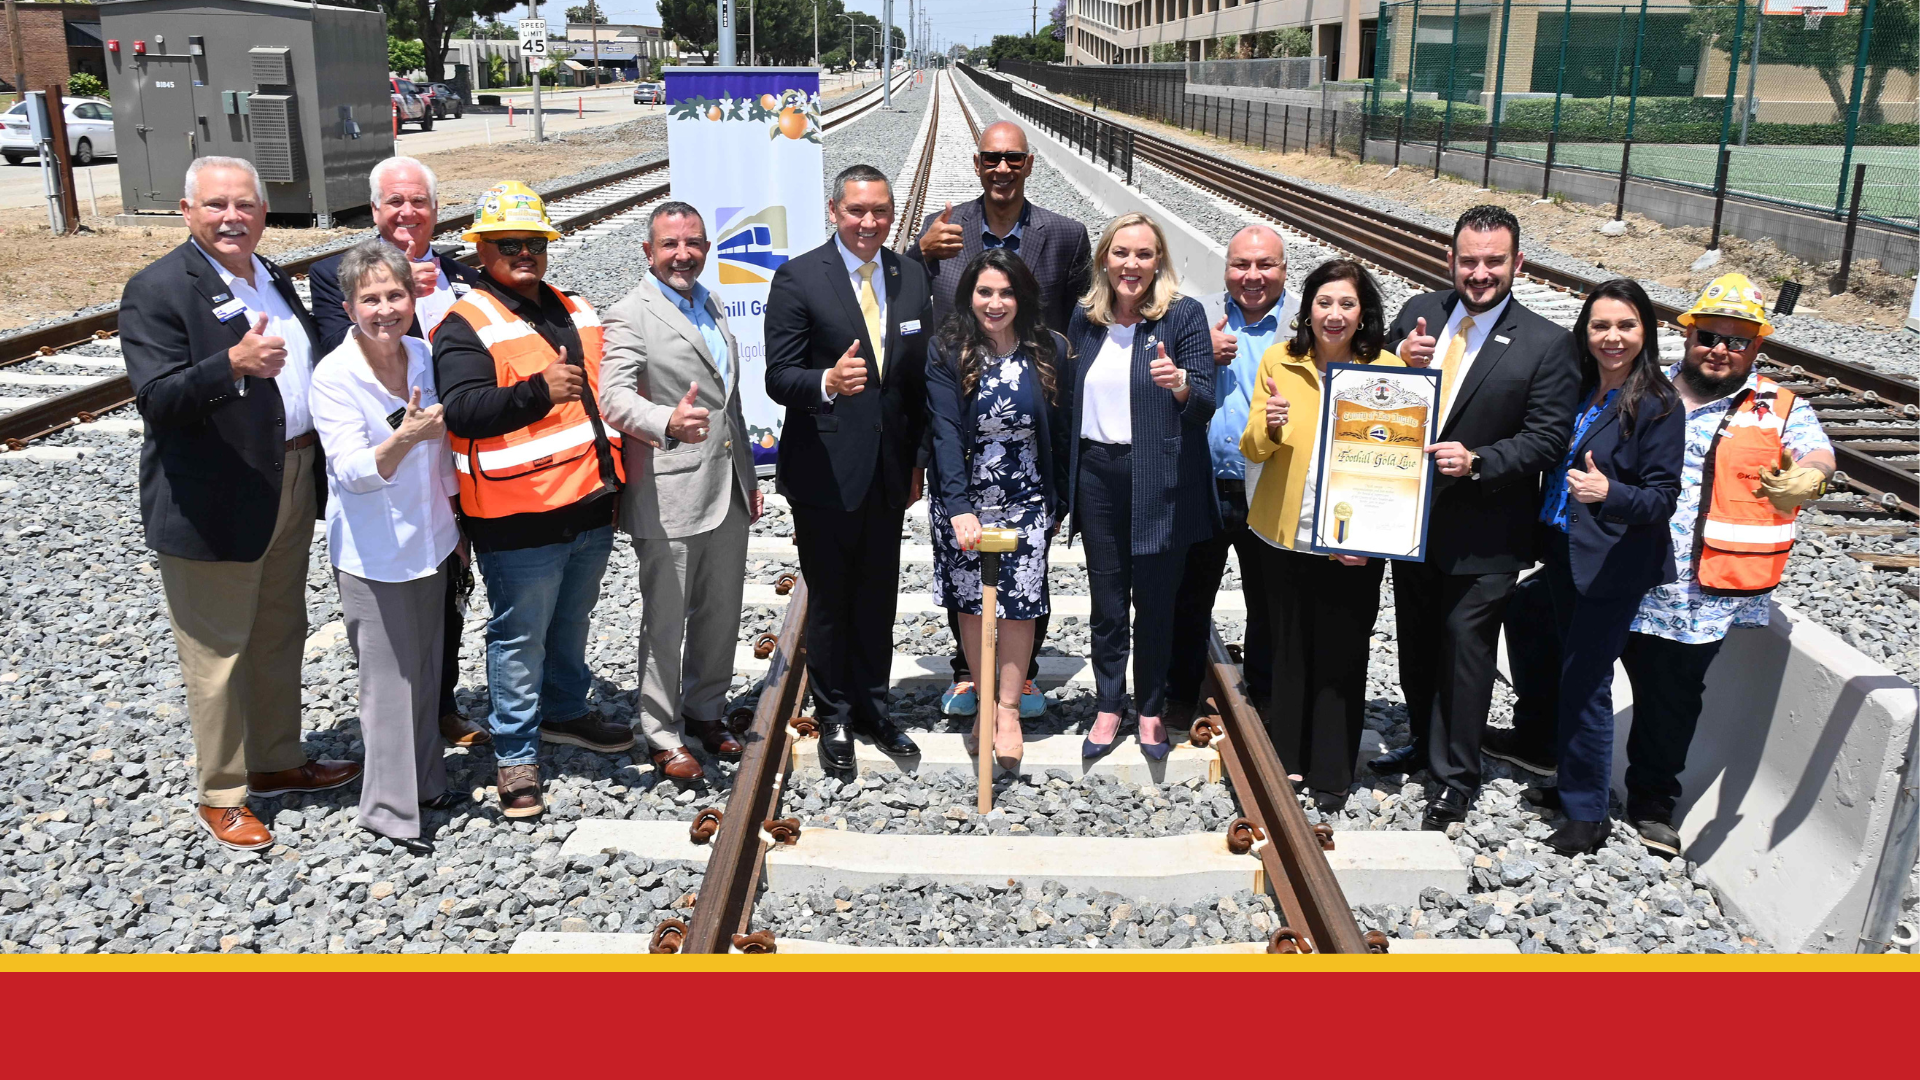 Local leaders celebrating completion of major track construction